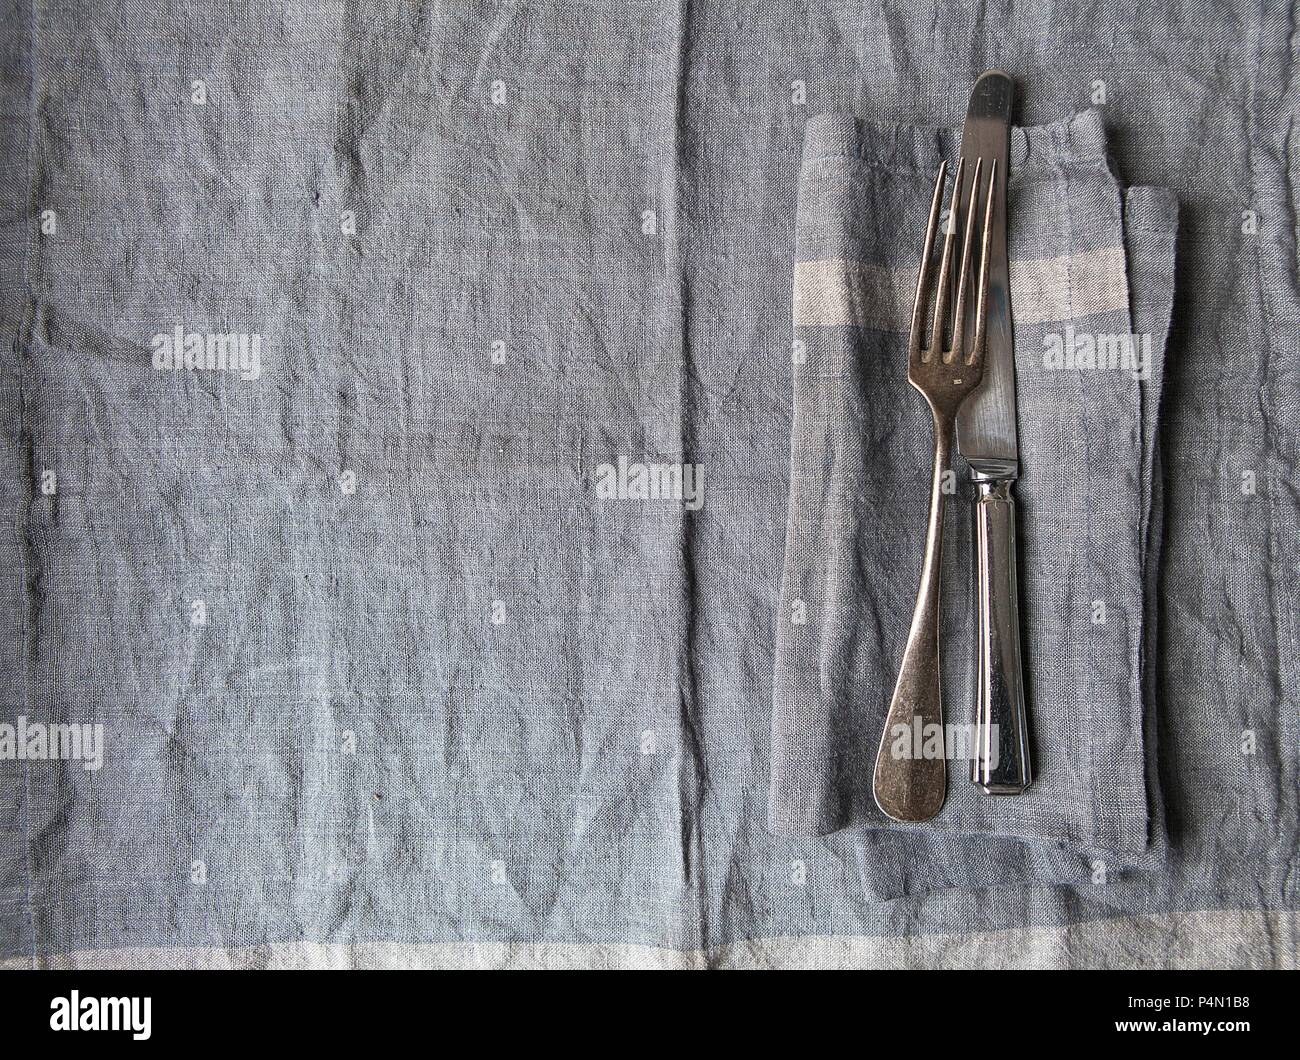 Grey linen place setting with matching grey linen napkin and vintage silver knife and fork Stock Photo